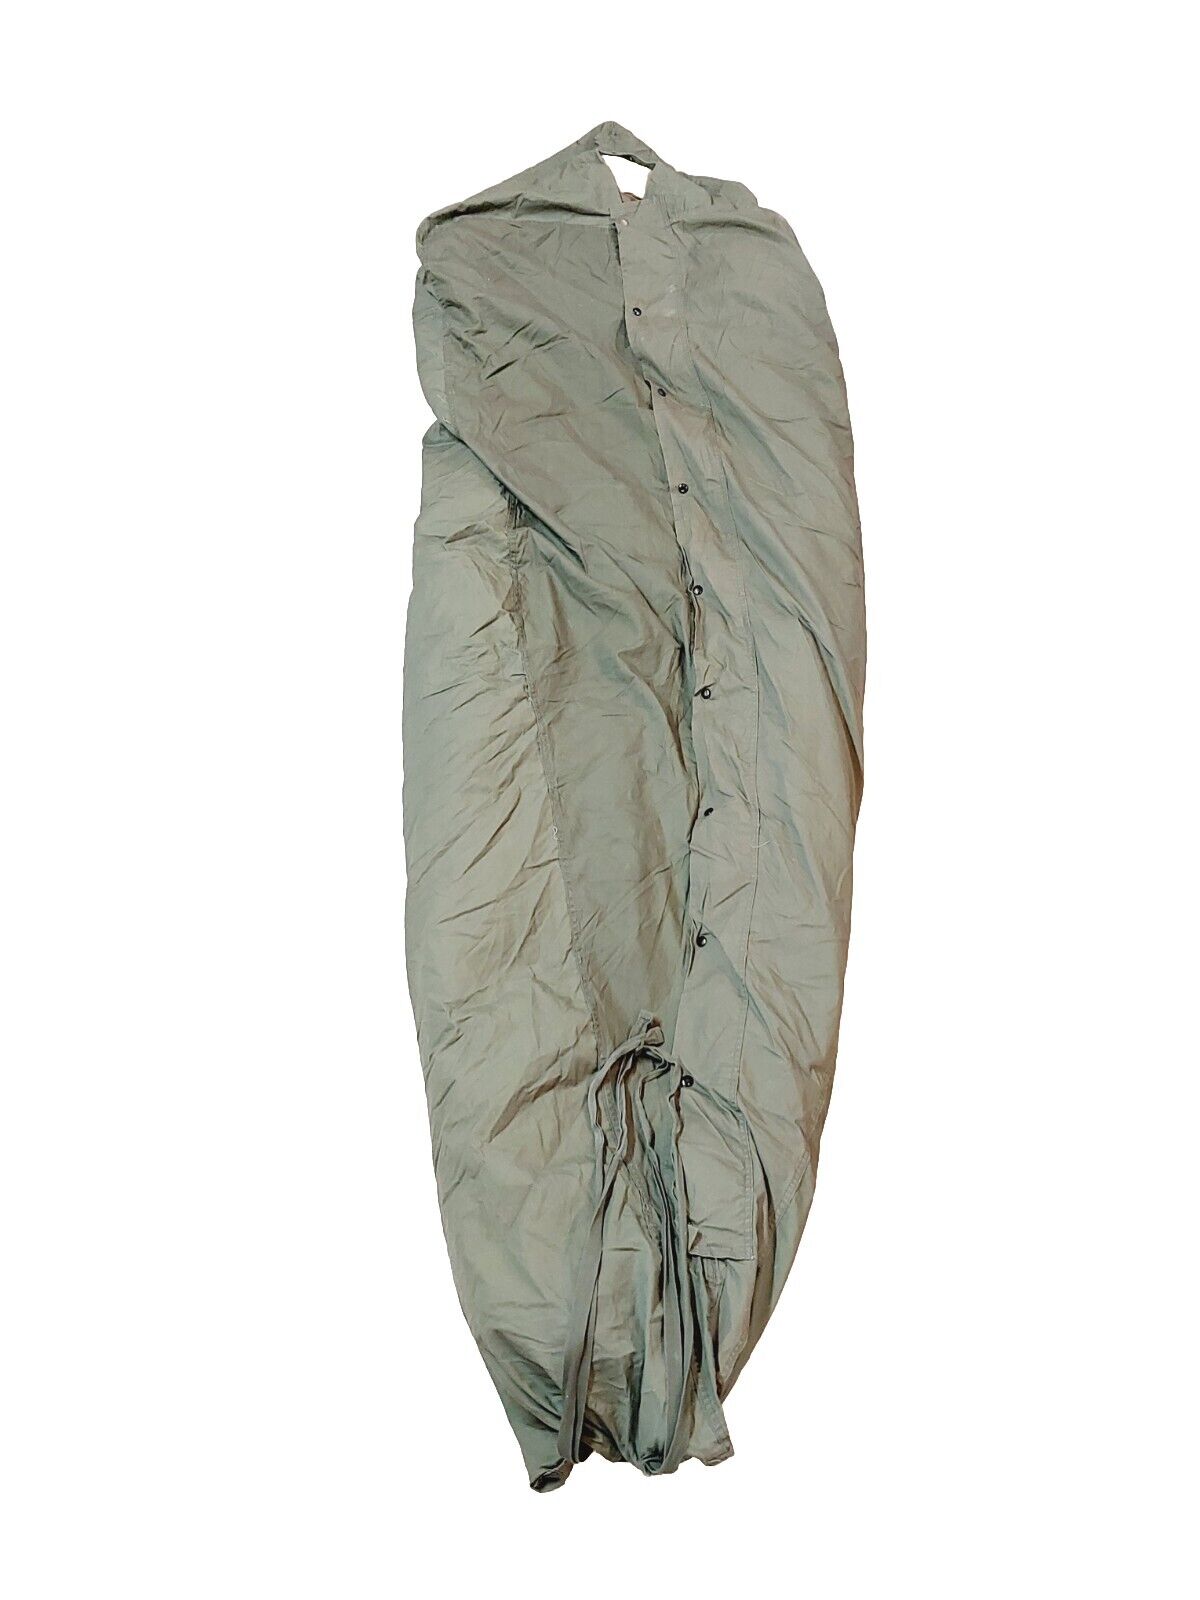 Vintage US Army M-1949 Feather Filled Mountain Sleeping Bag Vietnam 1967